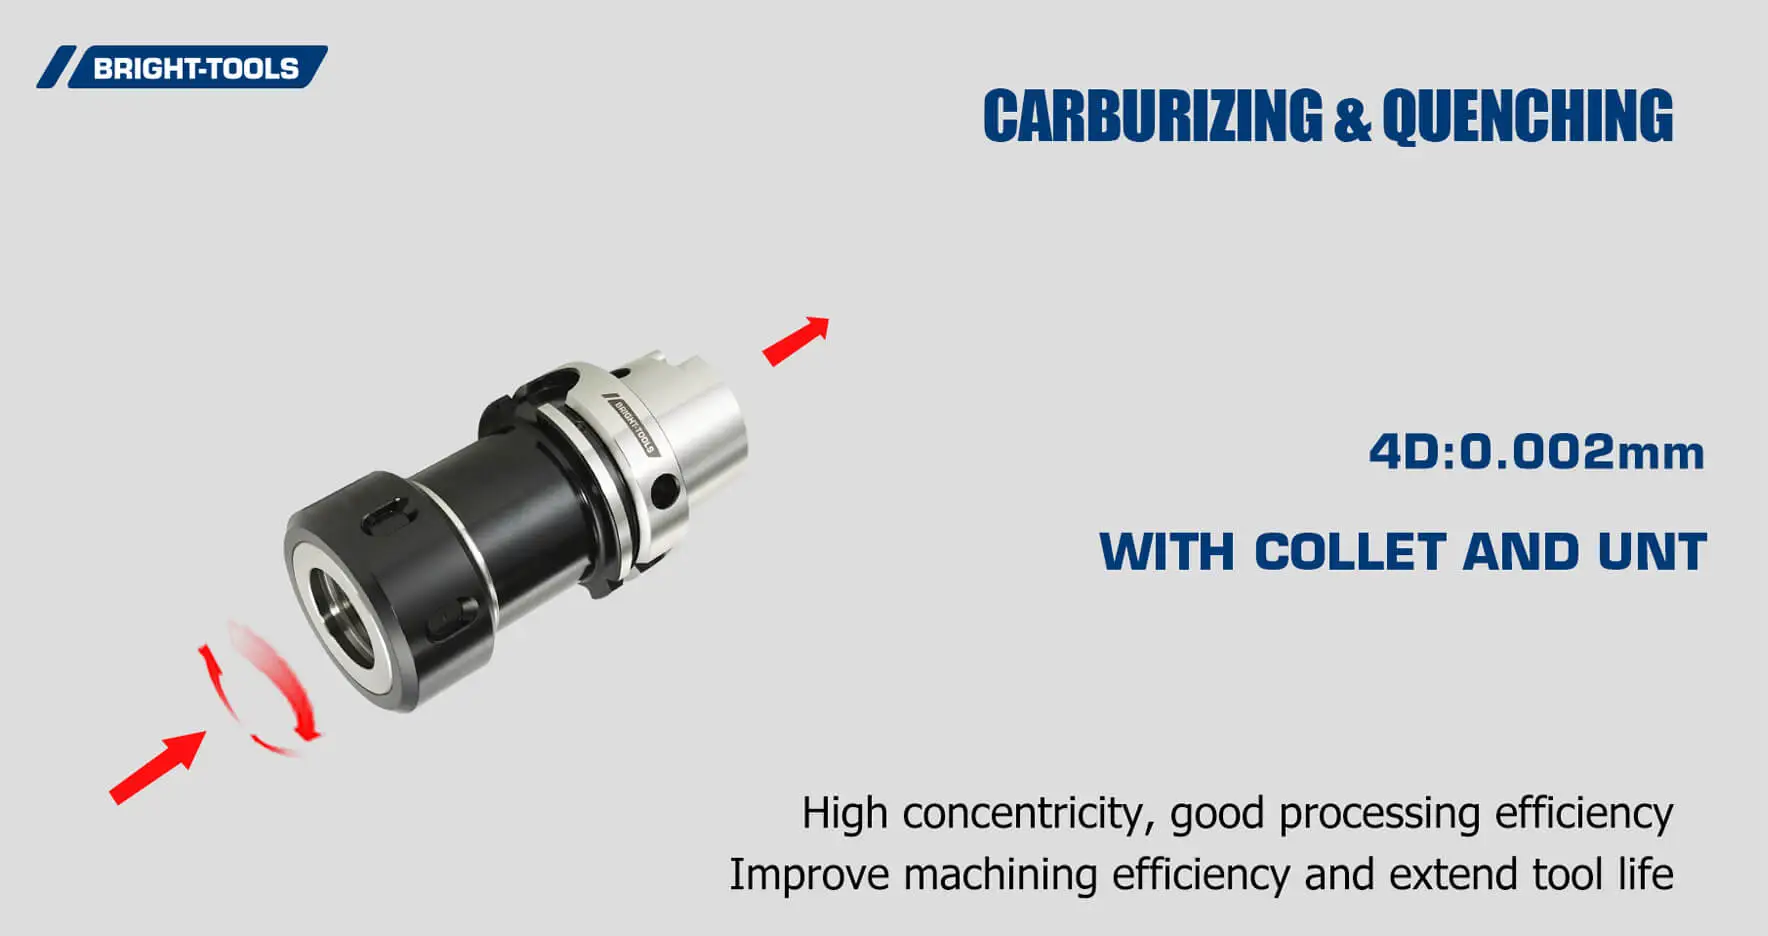 Carburizing & Quenching Of Hsk Tool